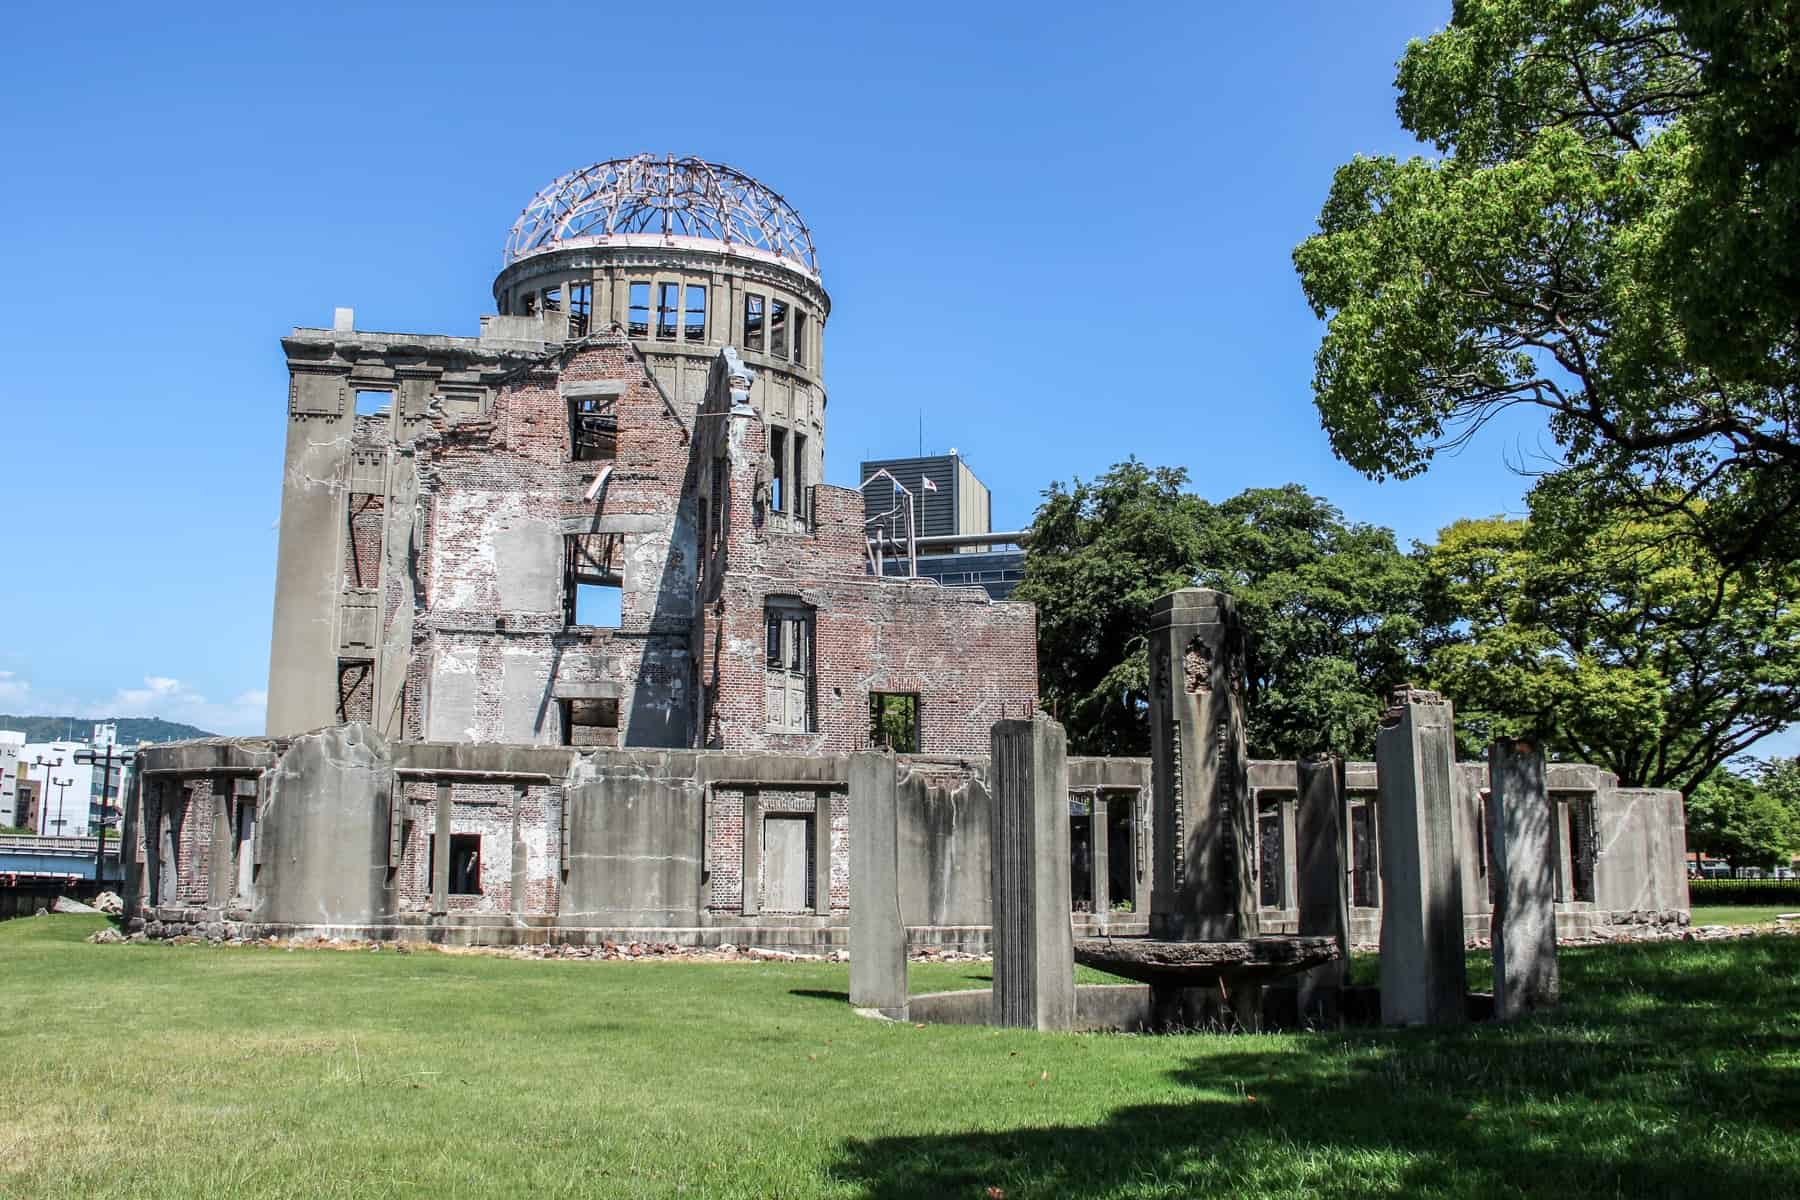 The building shell ruins of the Atomic Bomb Dome in Hiroshima set in the green Peace Park Memorial grounds. 